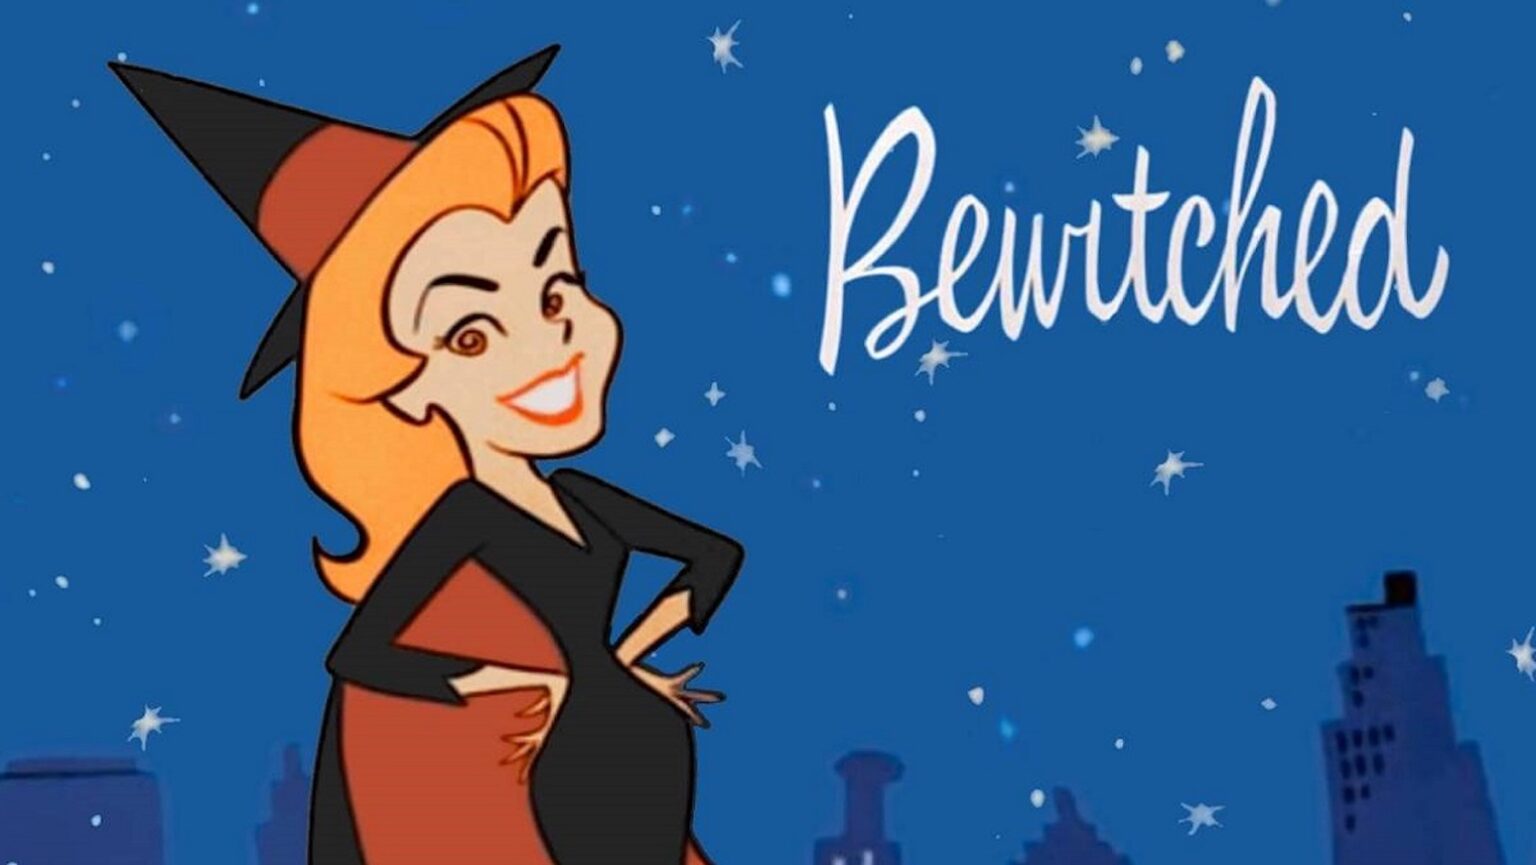 A new 'Bewitched' movie is in the works at Sony Pictures. Cast a spell to learn all the details about the project.